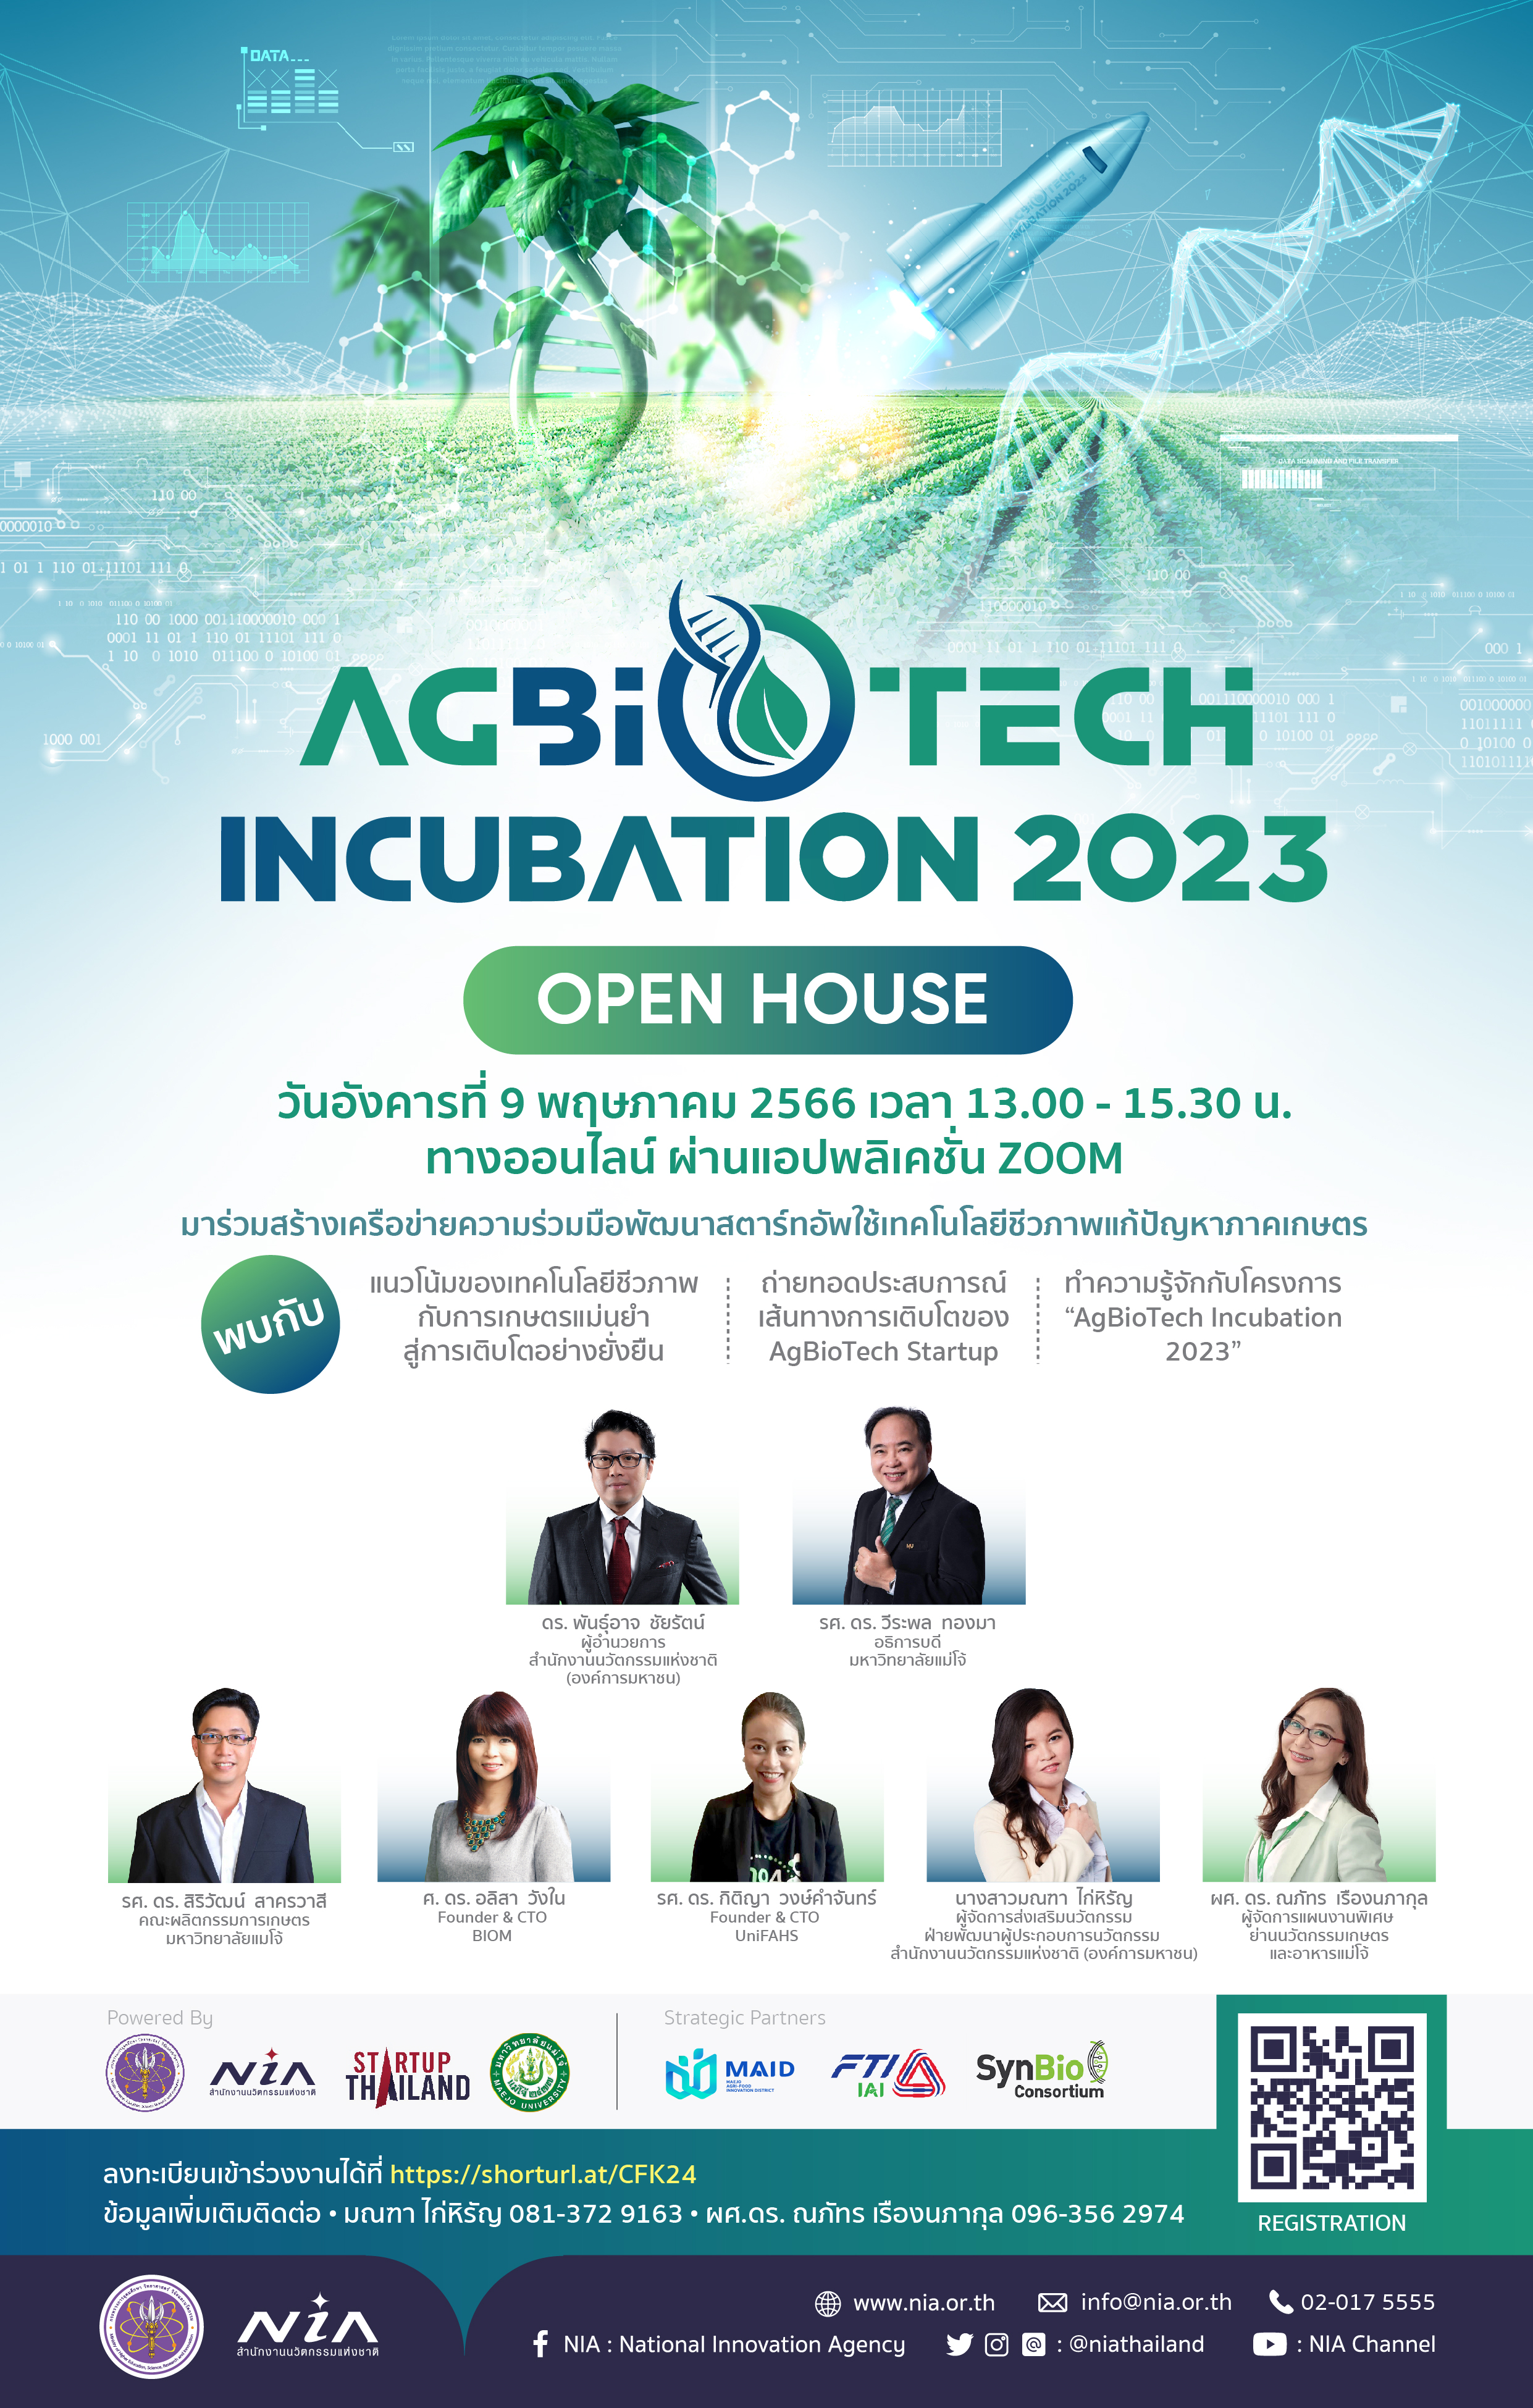 AGBIOTECH23_OPENHOUSE